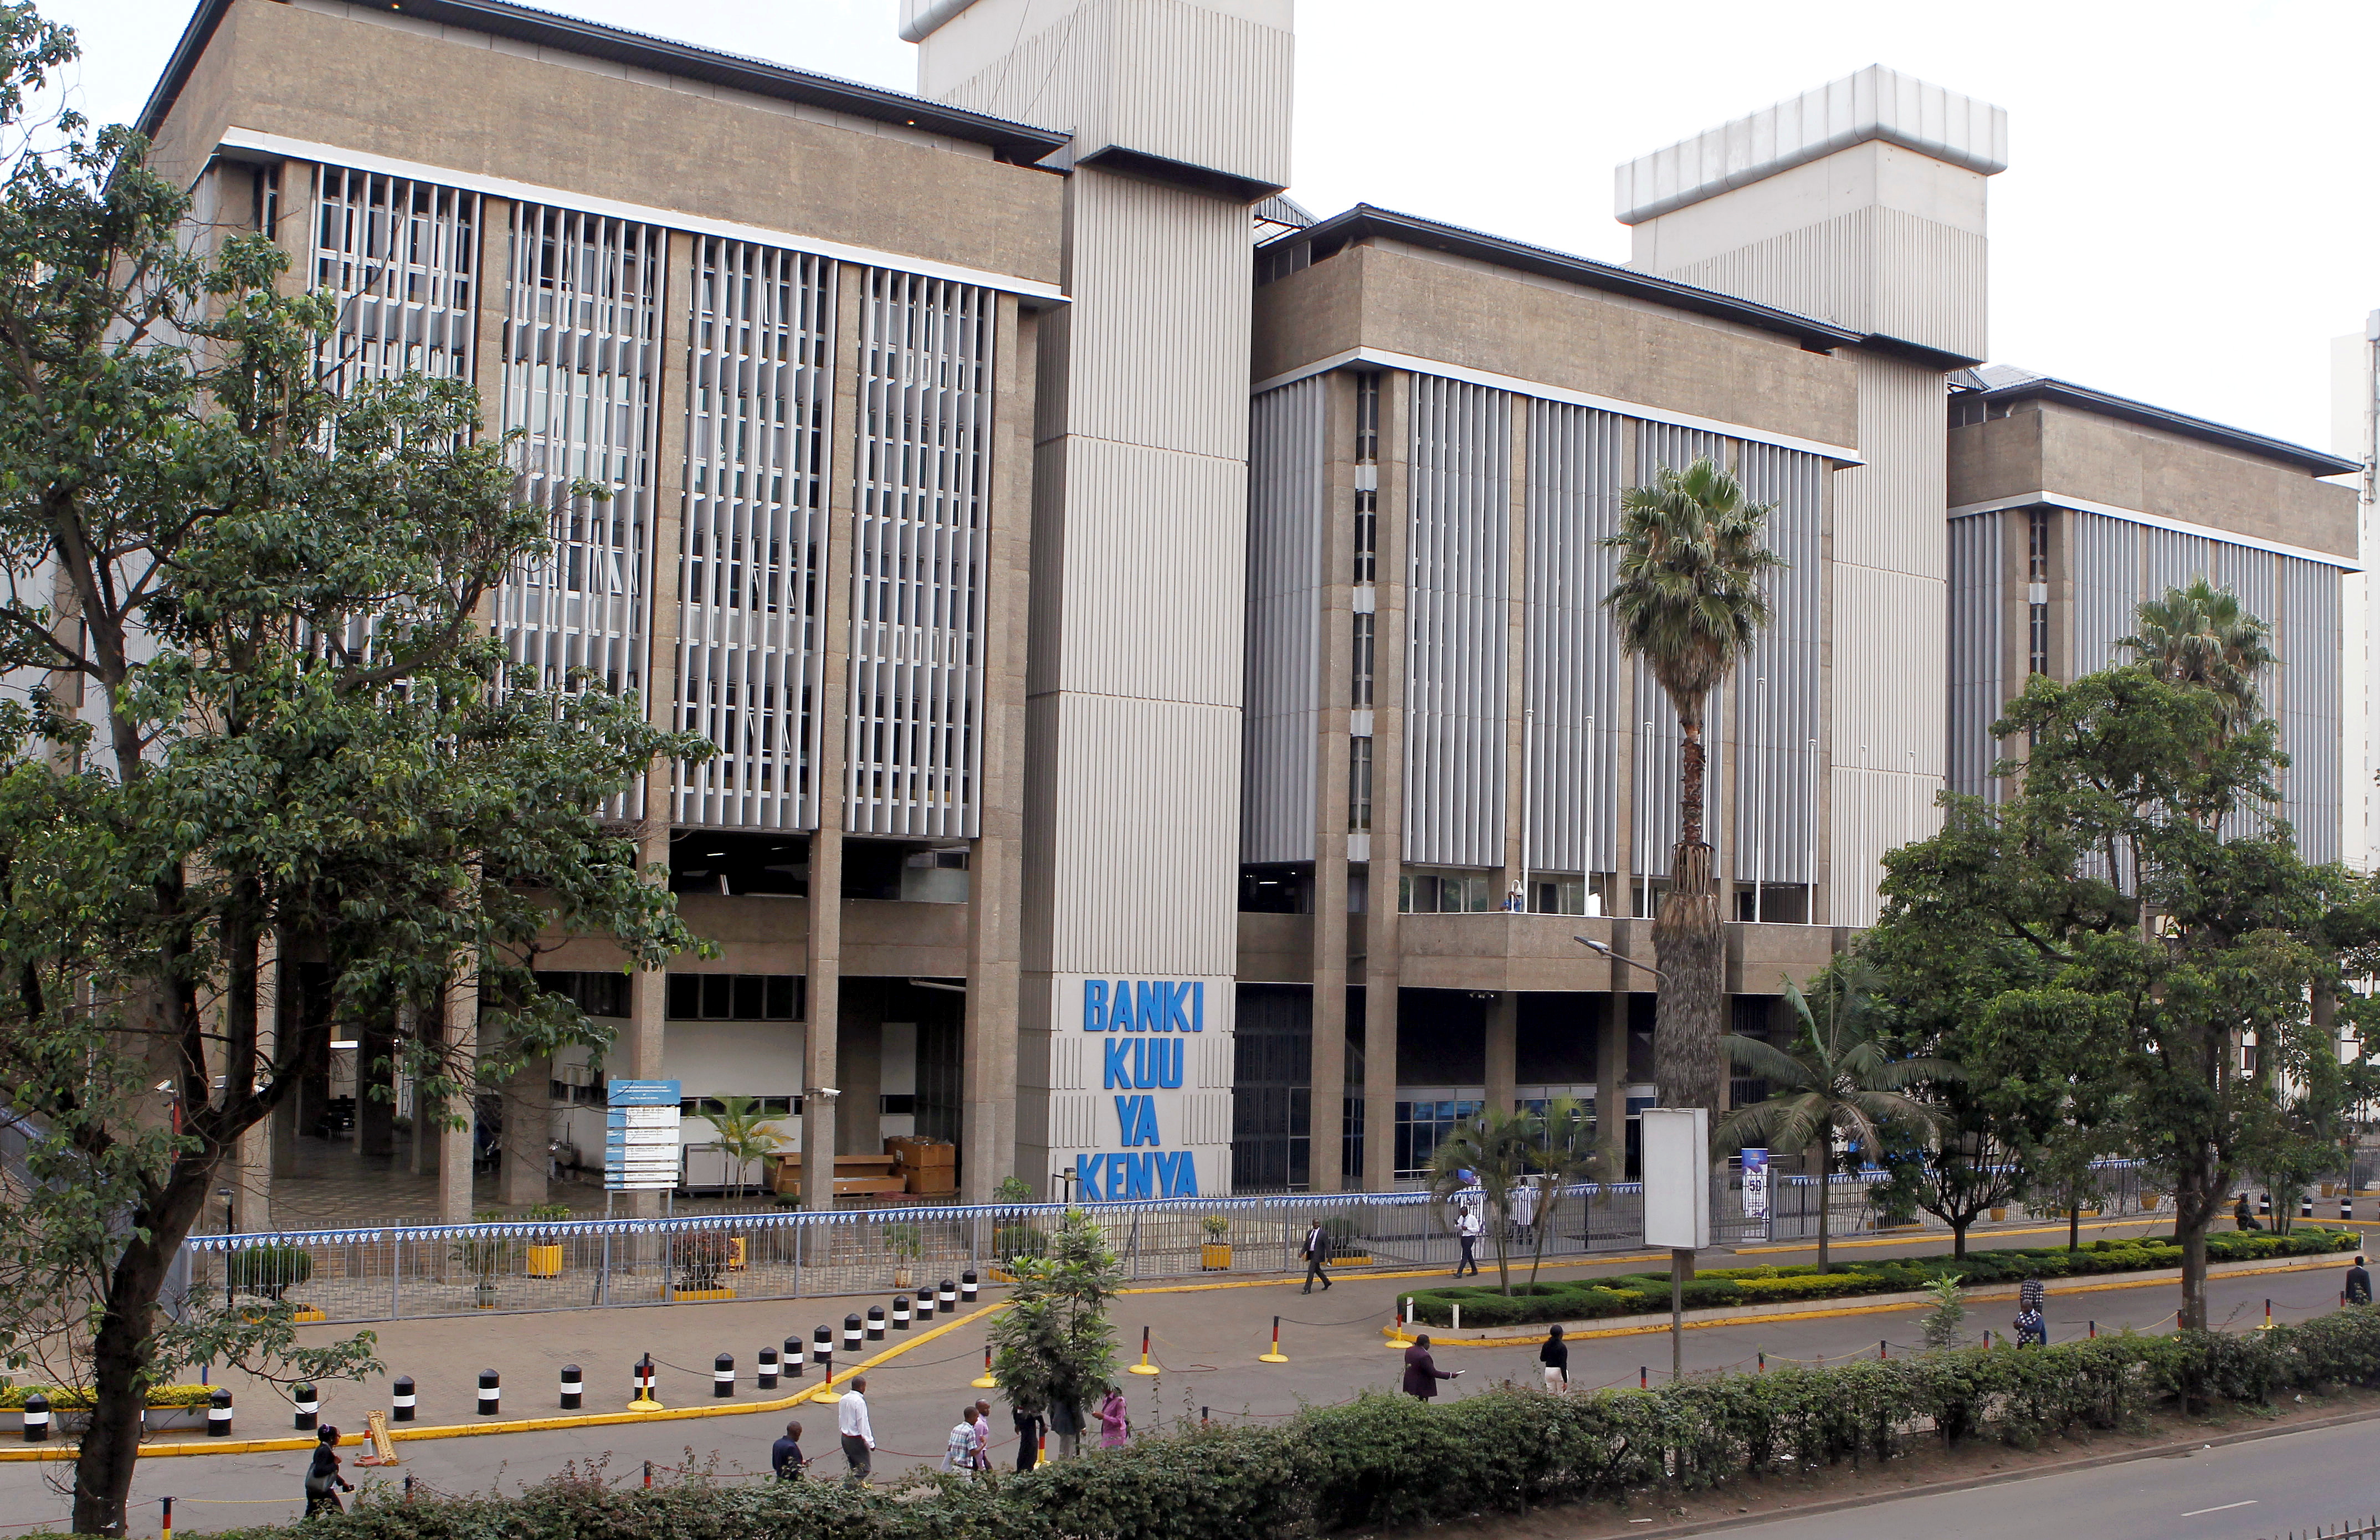 A general view shows the Central Bank of Kenya headquarters building along Haile Selassie Avenue in Nairobi